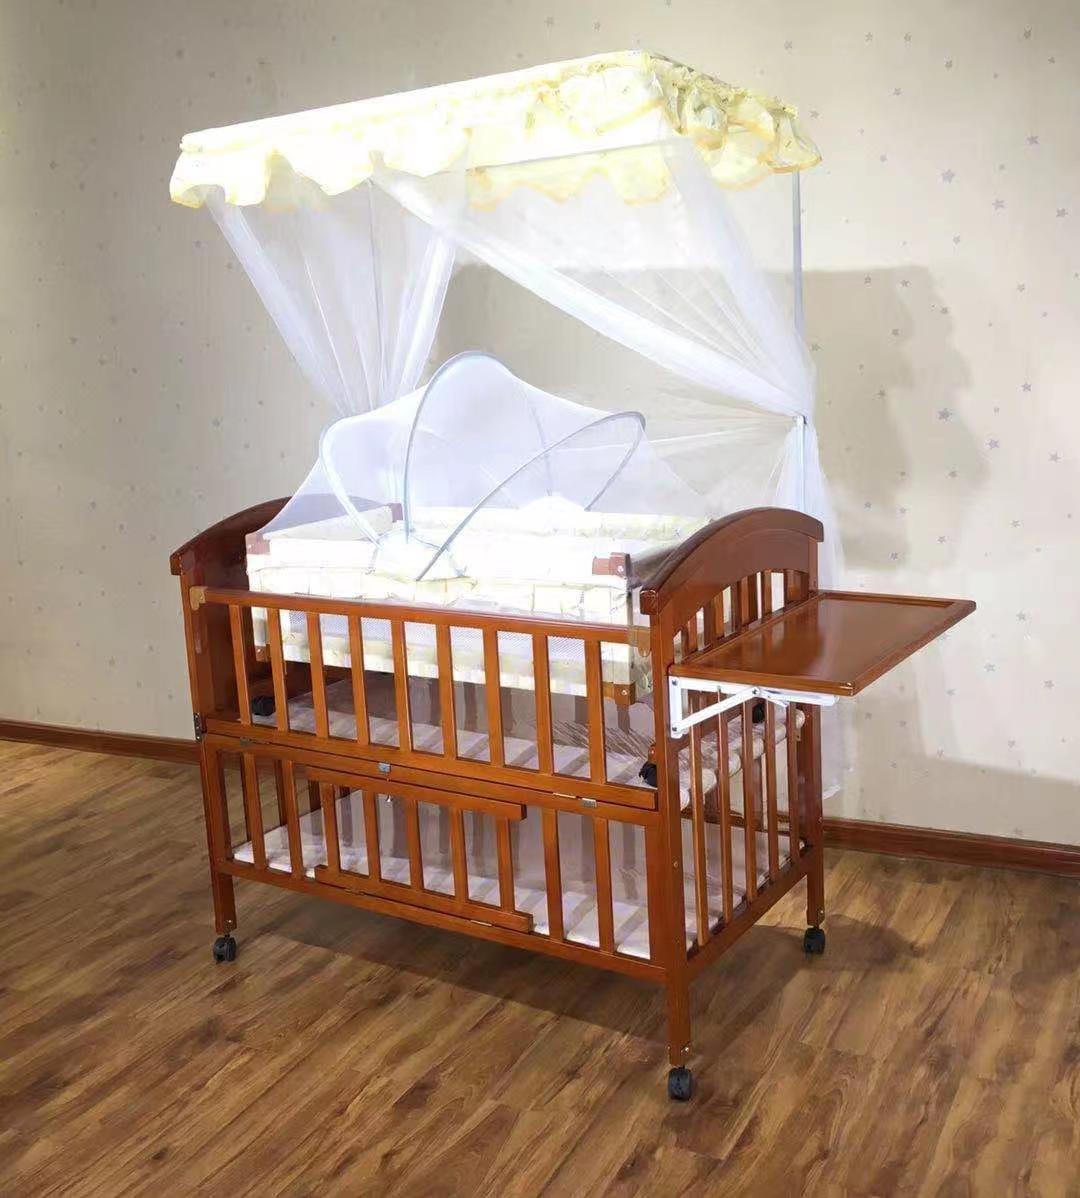 Baby Wooden Cot Bed/Baby Crib With Mattress And Mosquito Nets, Pine Wood Kids Crib with 4 Lockable Wheels, Portable Infant Cot with Mosquito Net